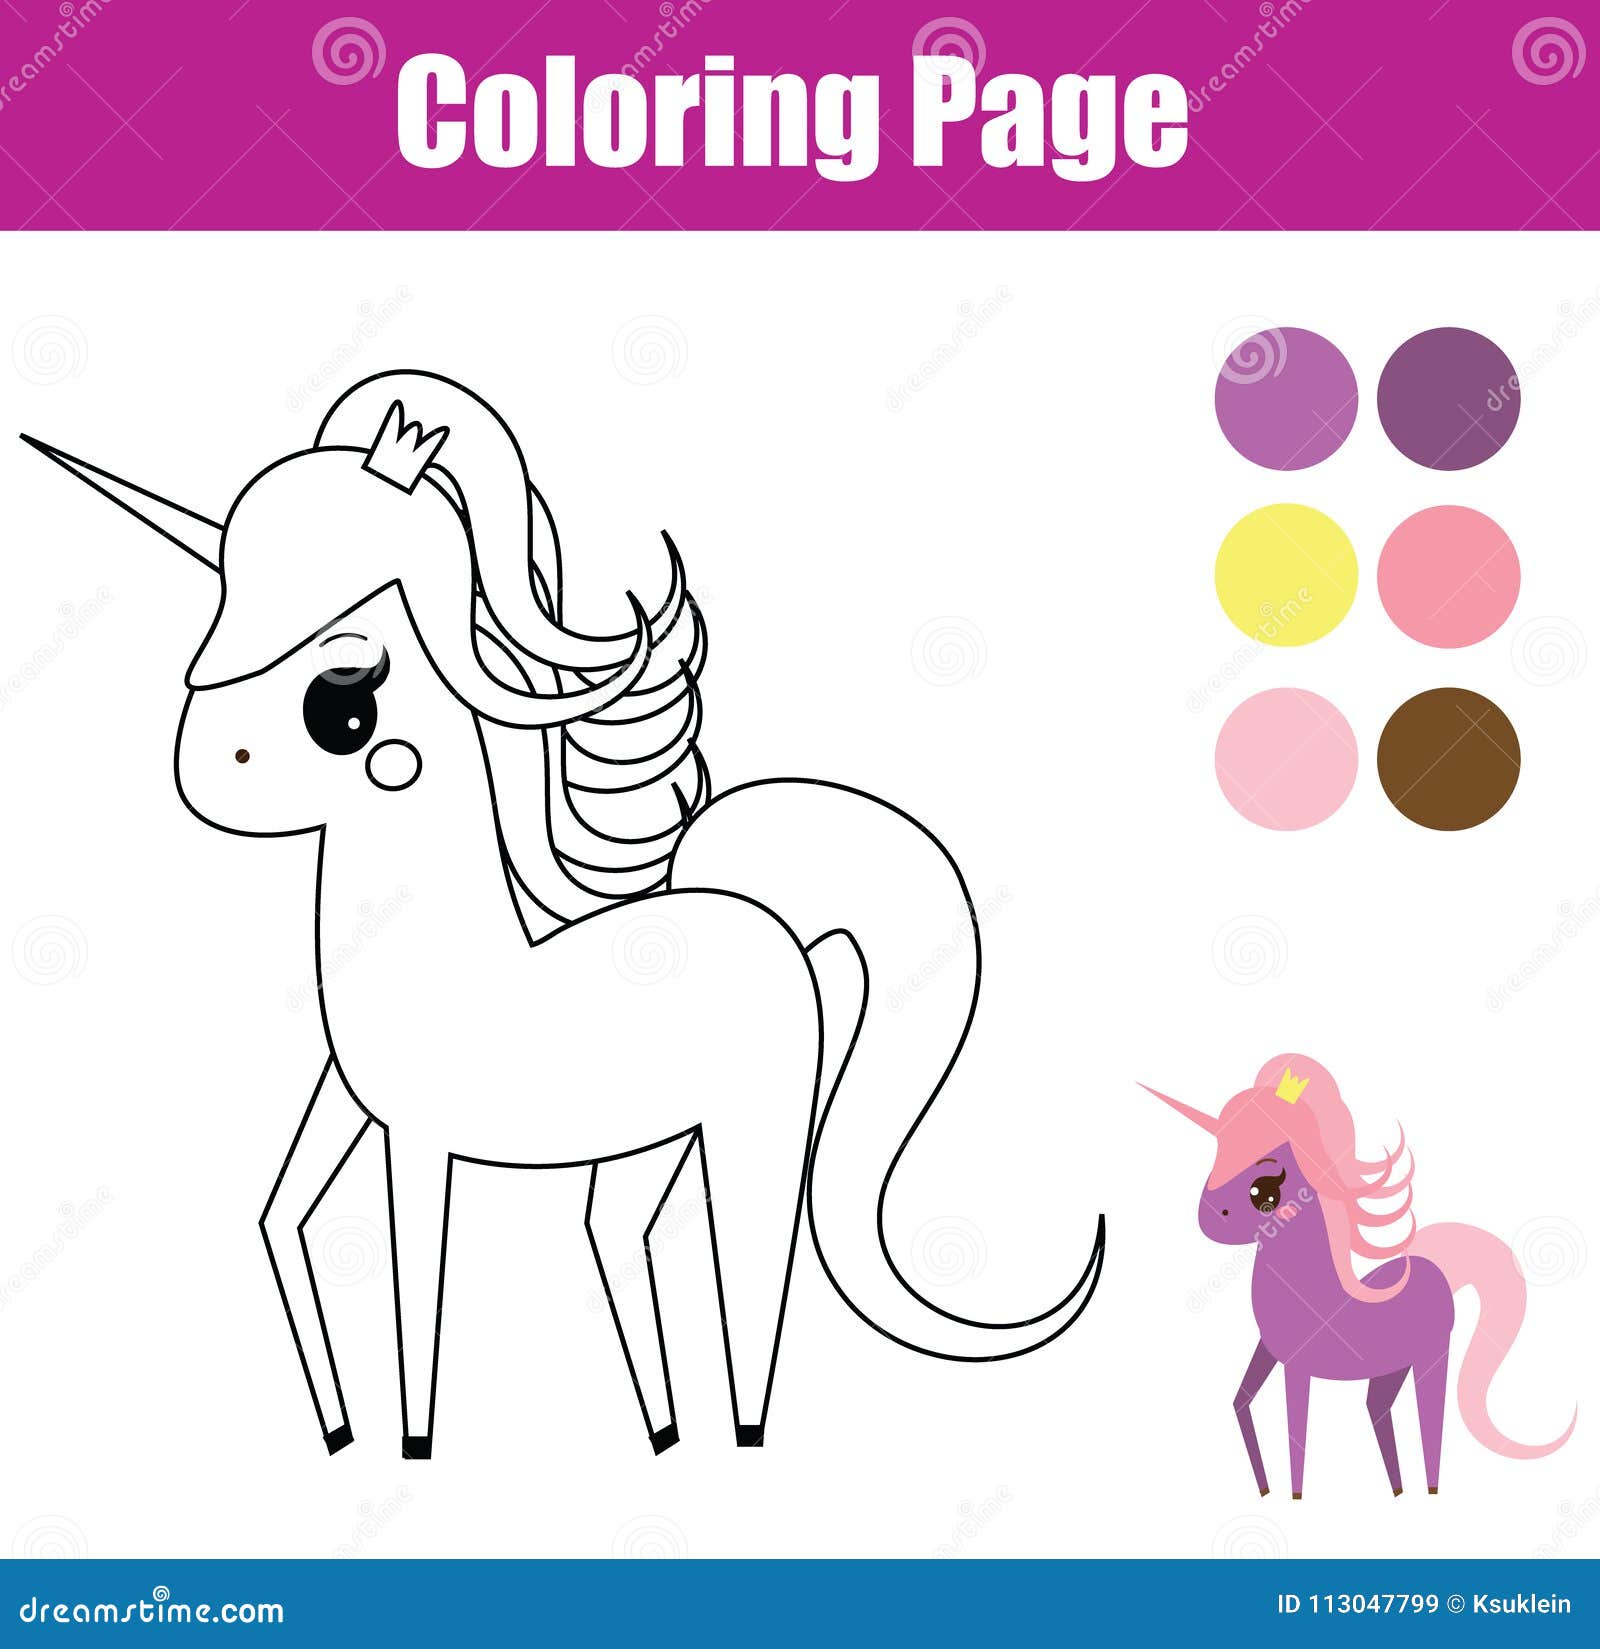 Coloring Page. Educational Children Game. Unicorn, Fairy Pony ...